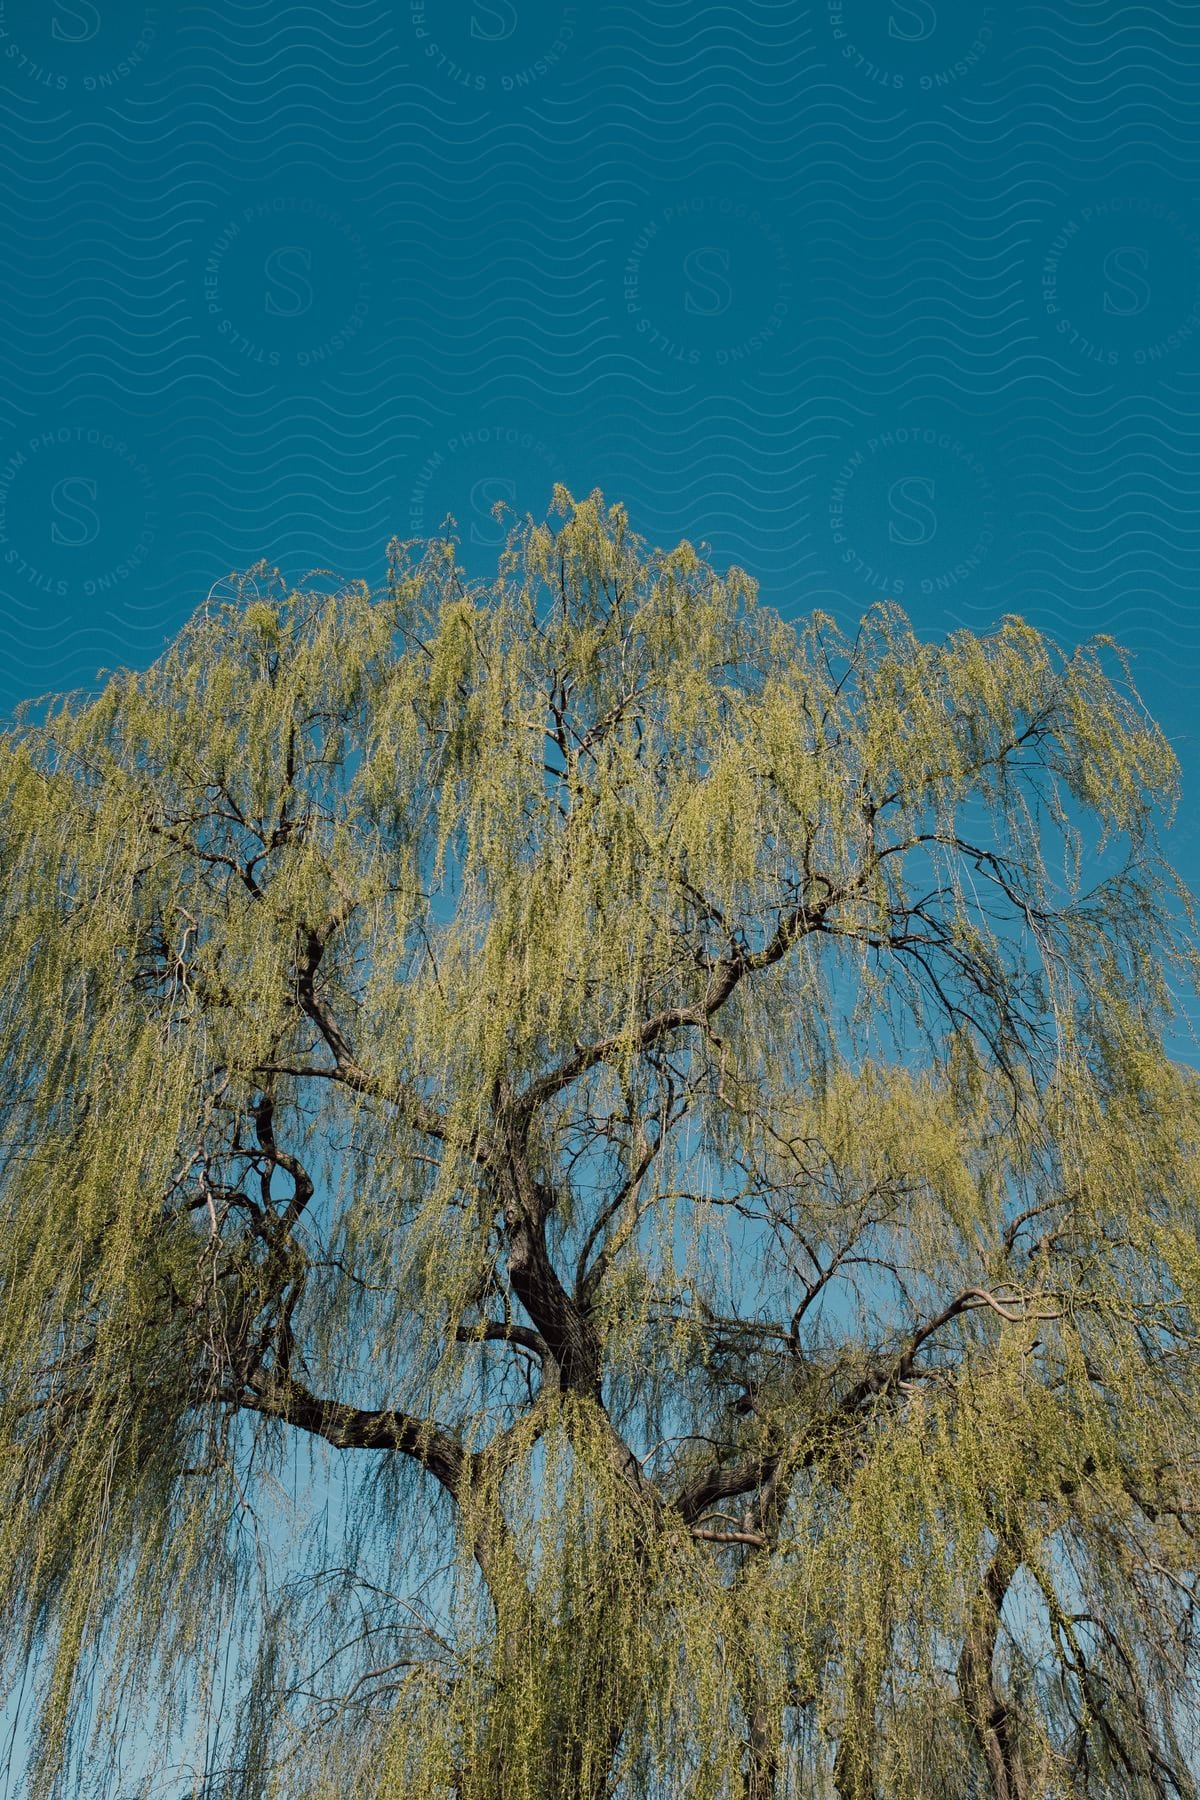 Willow tree with bare branches seen from an upward angle